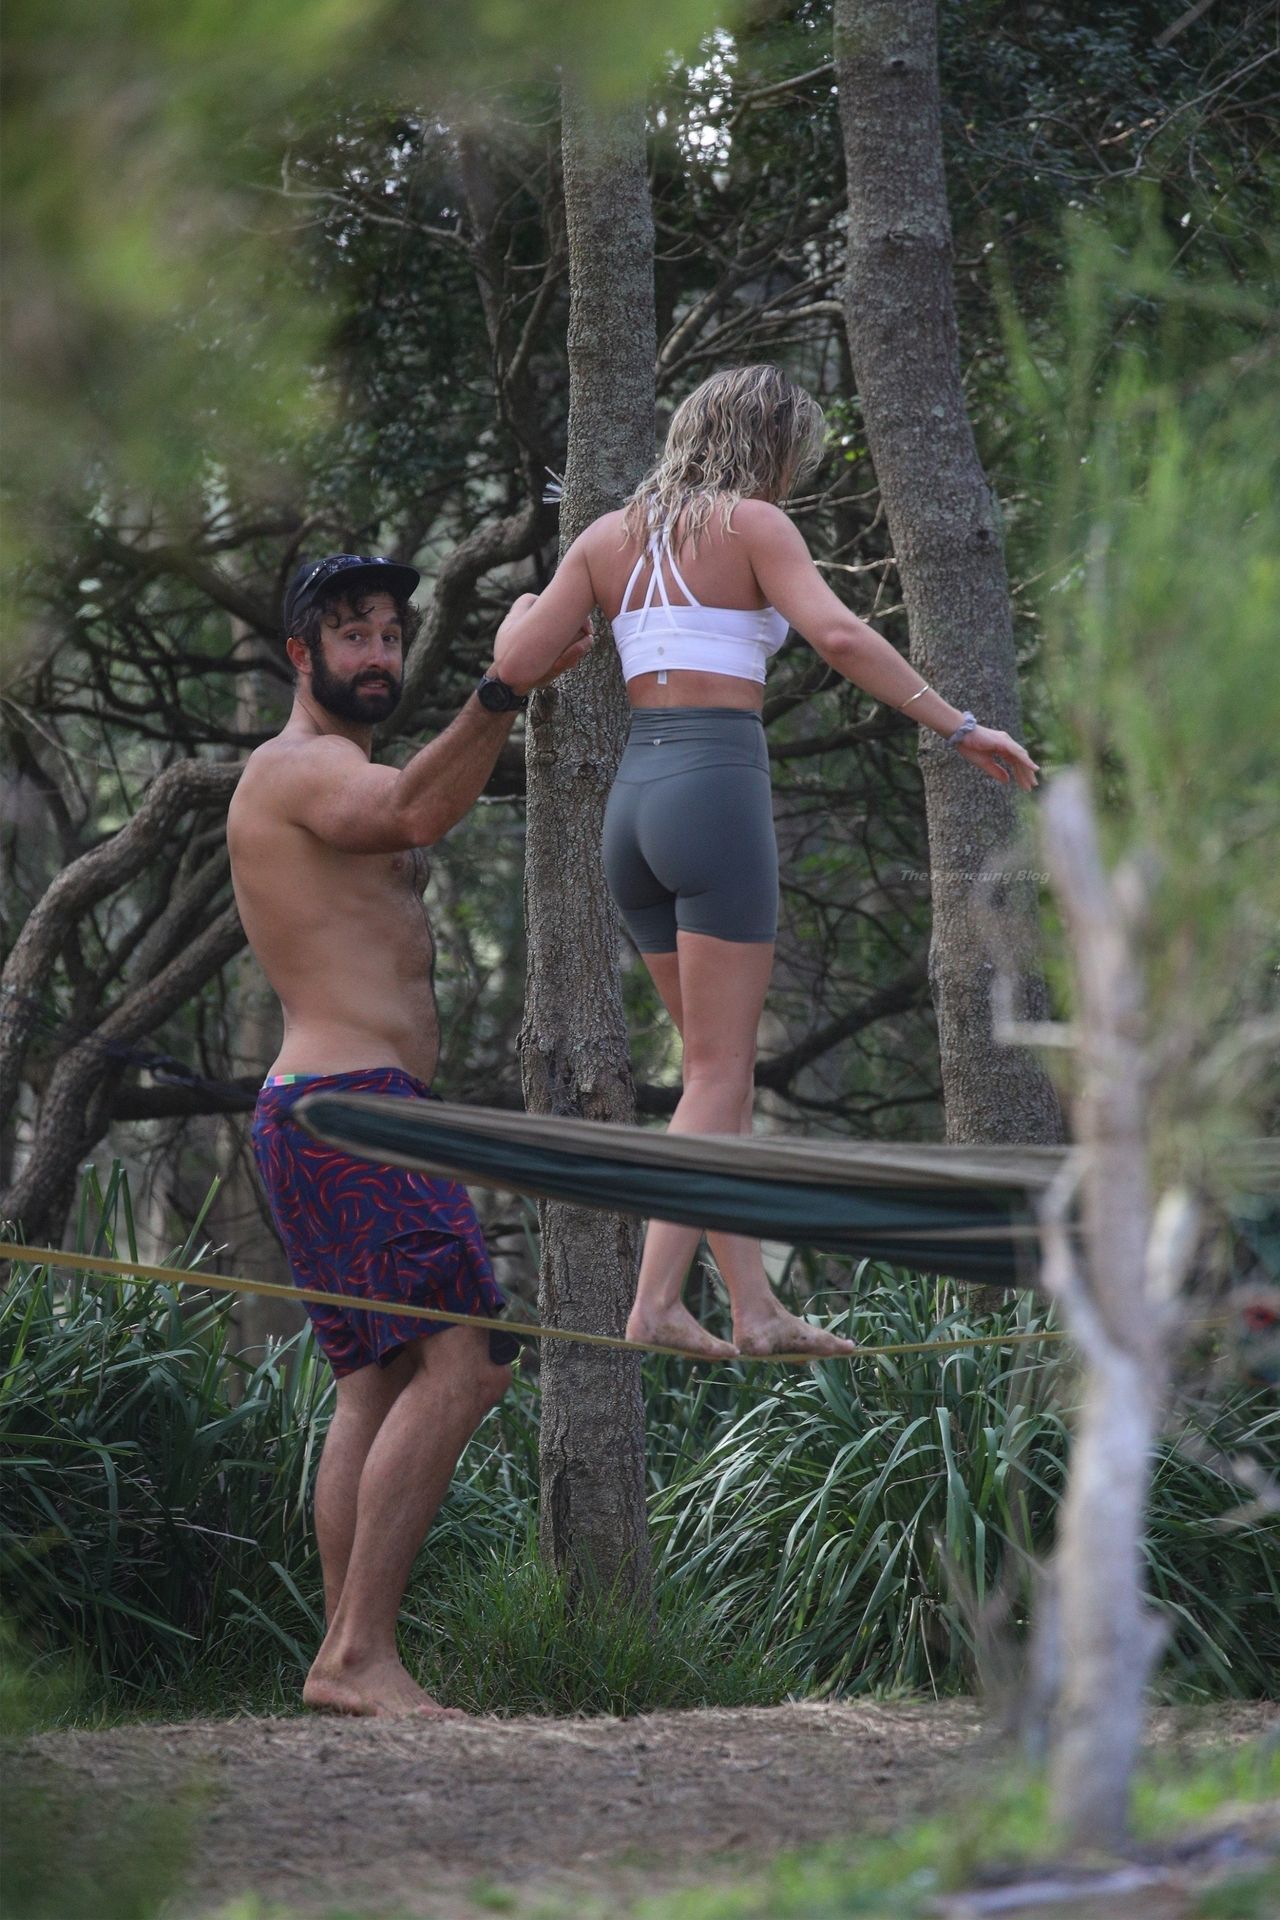 Jaimie Gardner is Pictured On a Date With a Hunk in Sydney (161 Photos)